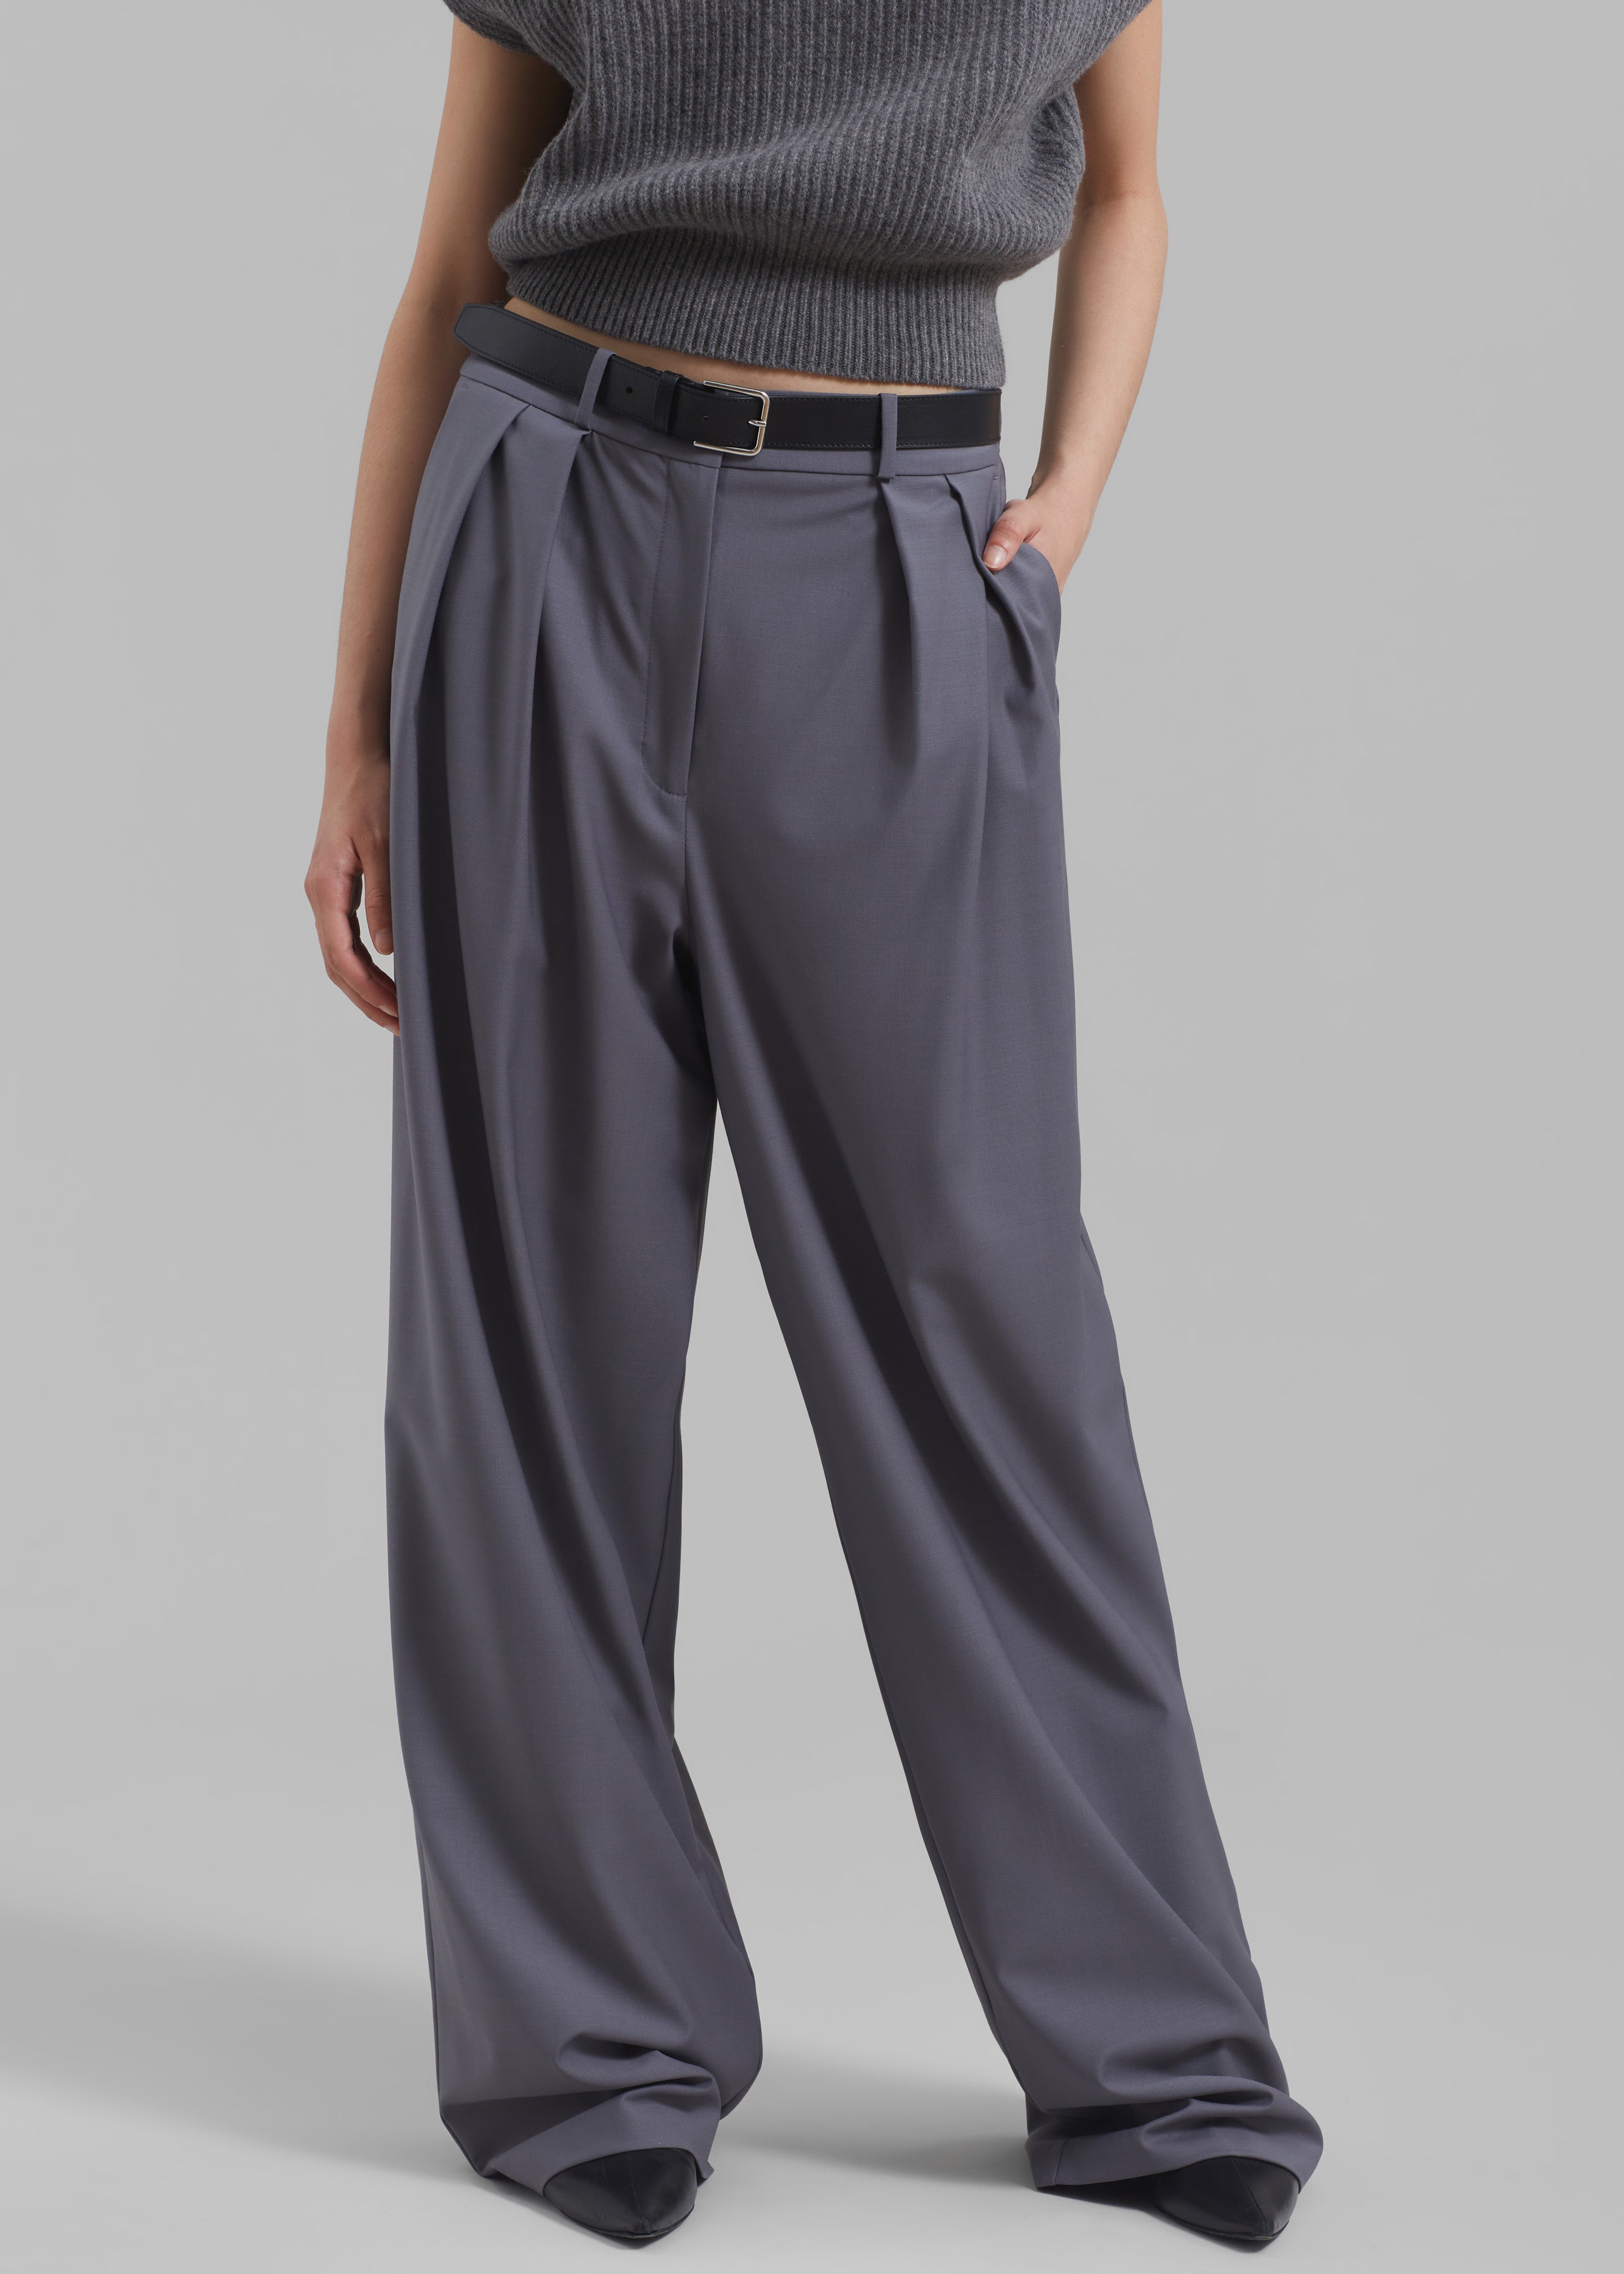 Ripley Pleated Trousers - Grey - 2